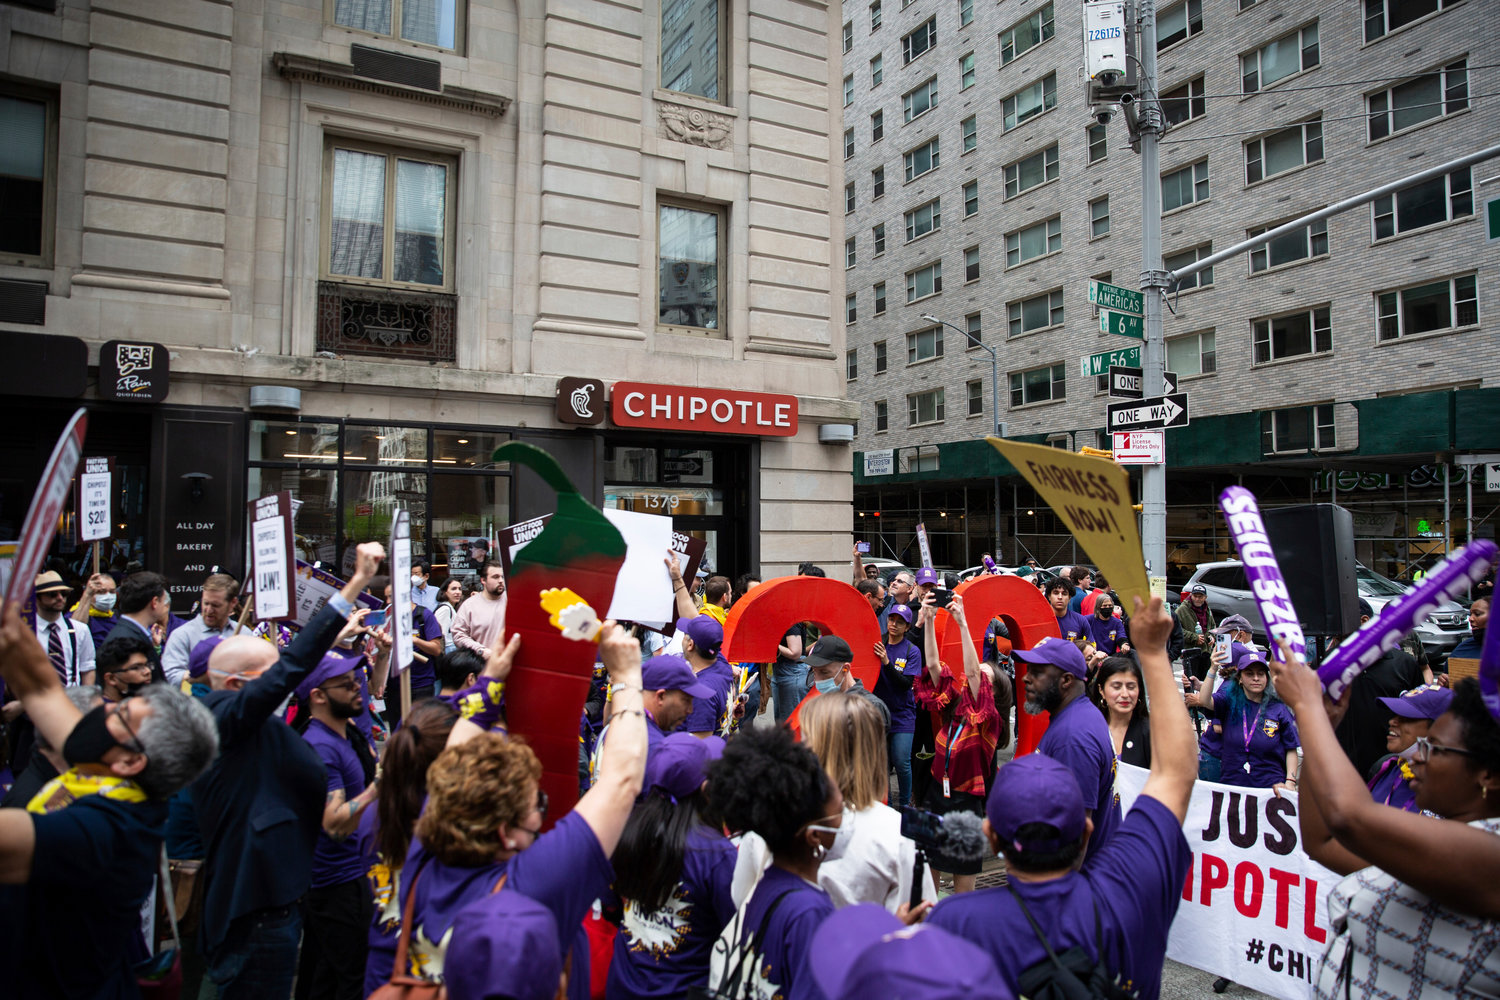 Current and former Chipotle workers rallied with elected officials along Sixth Avenue in Manhattan in May for higher wages and fair workplace practices.